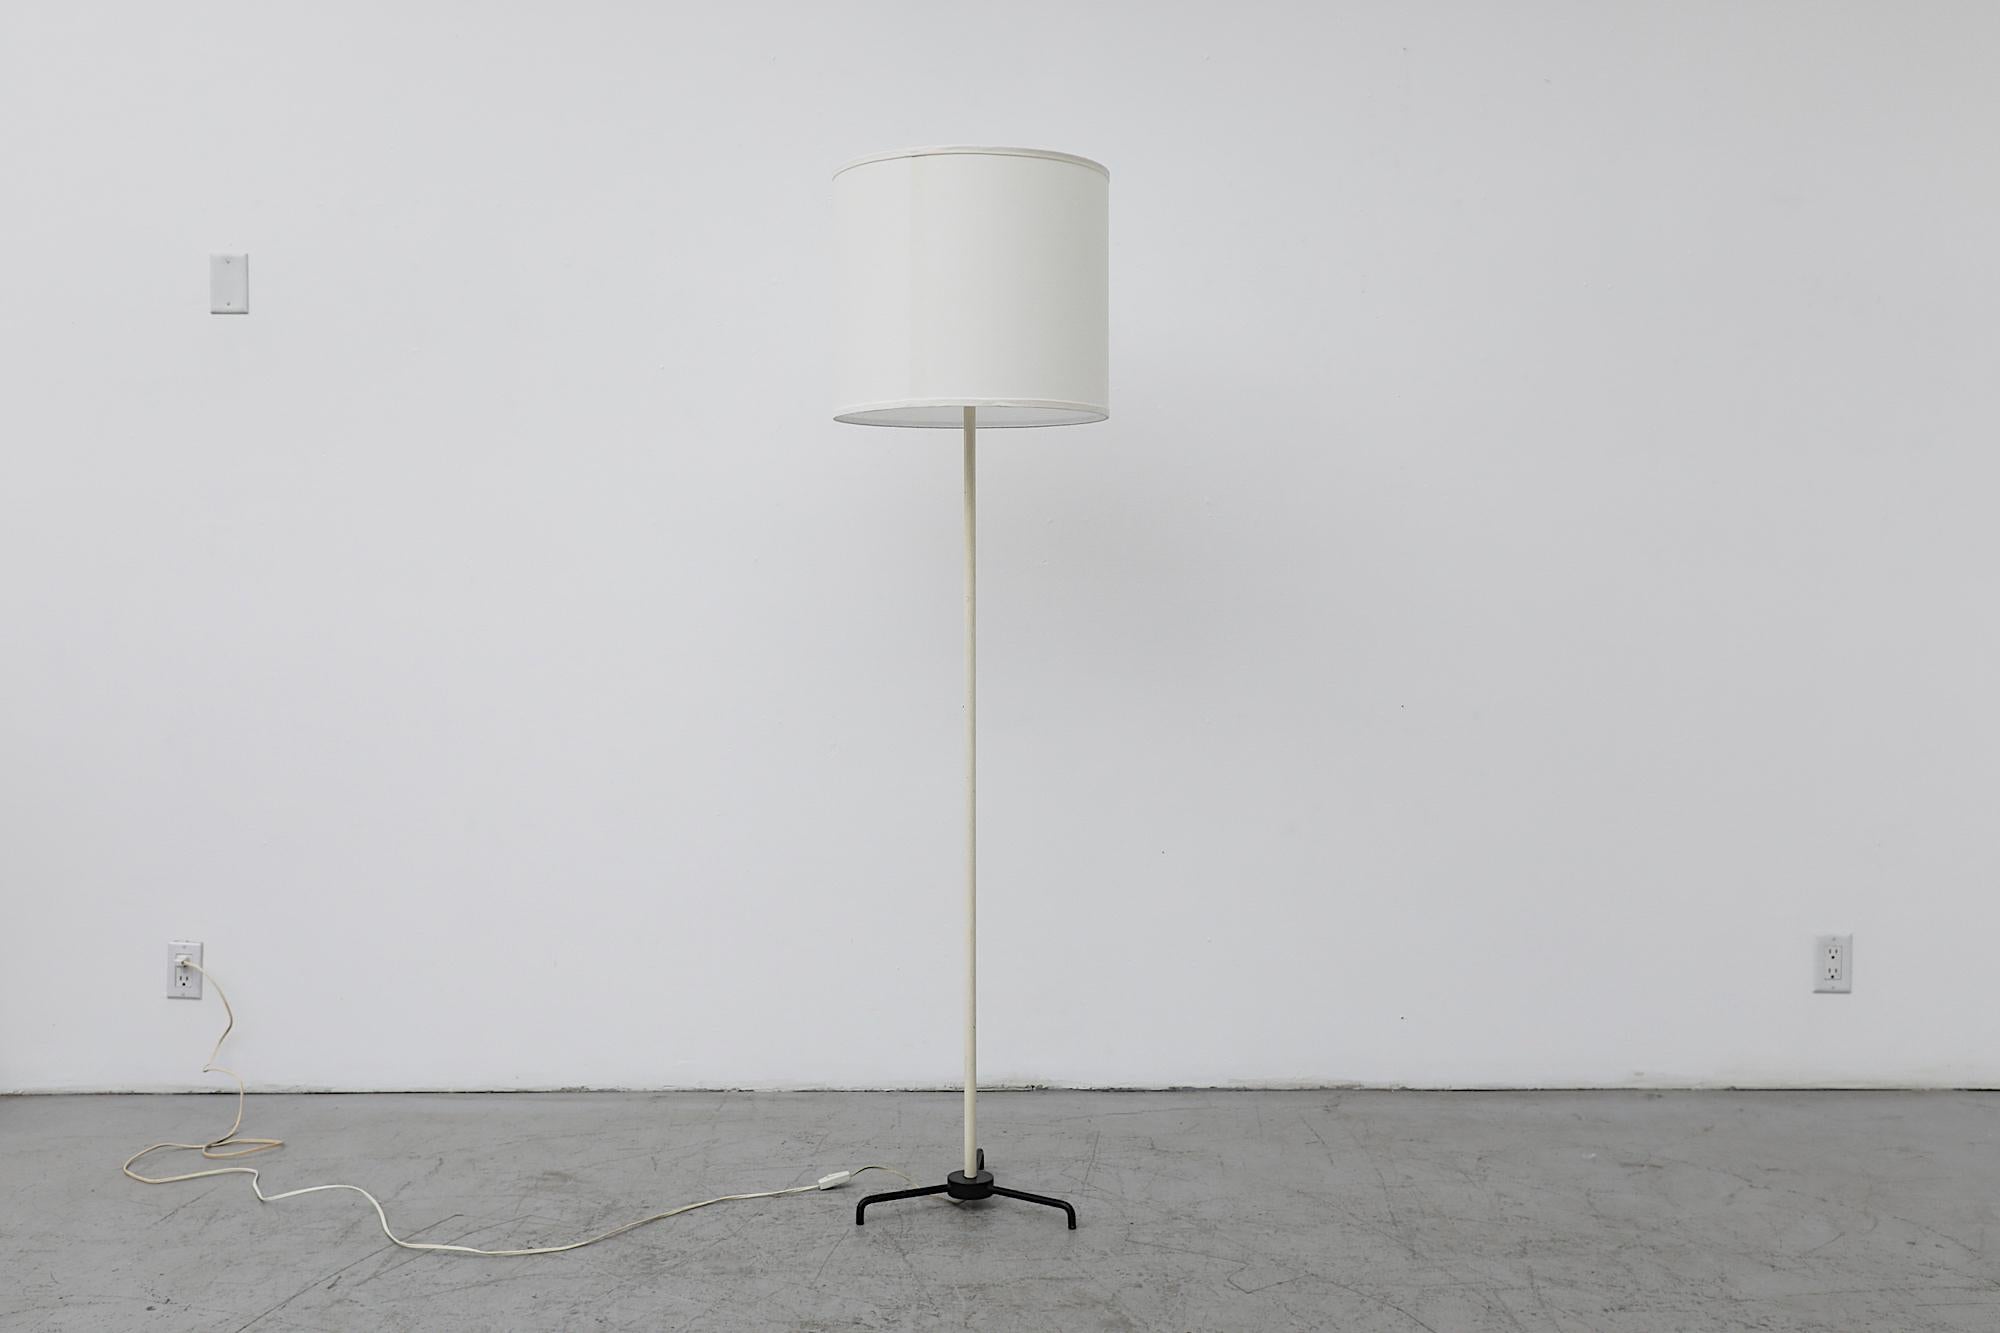 Mid-Century floor lamp with white enameled stem and black enameled Mategot Style tripod base. Newer white linen drum shade. In original condition with visible wear consistent with its age and use.